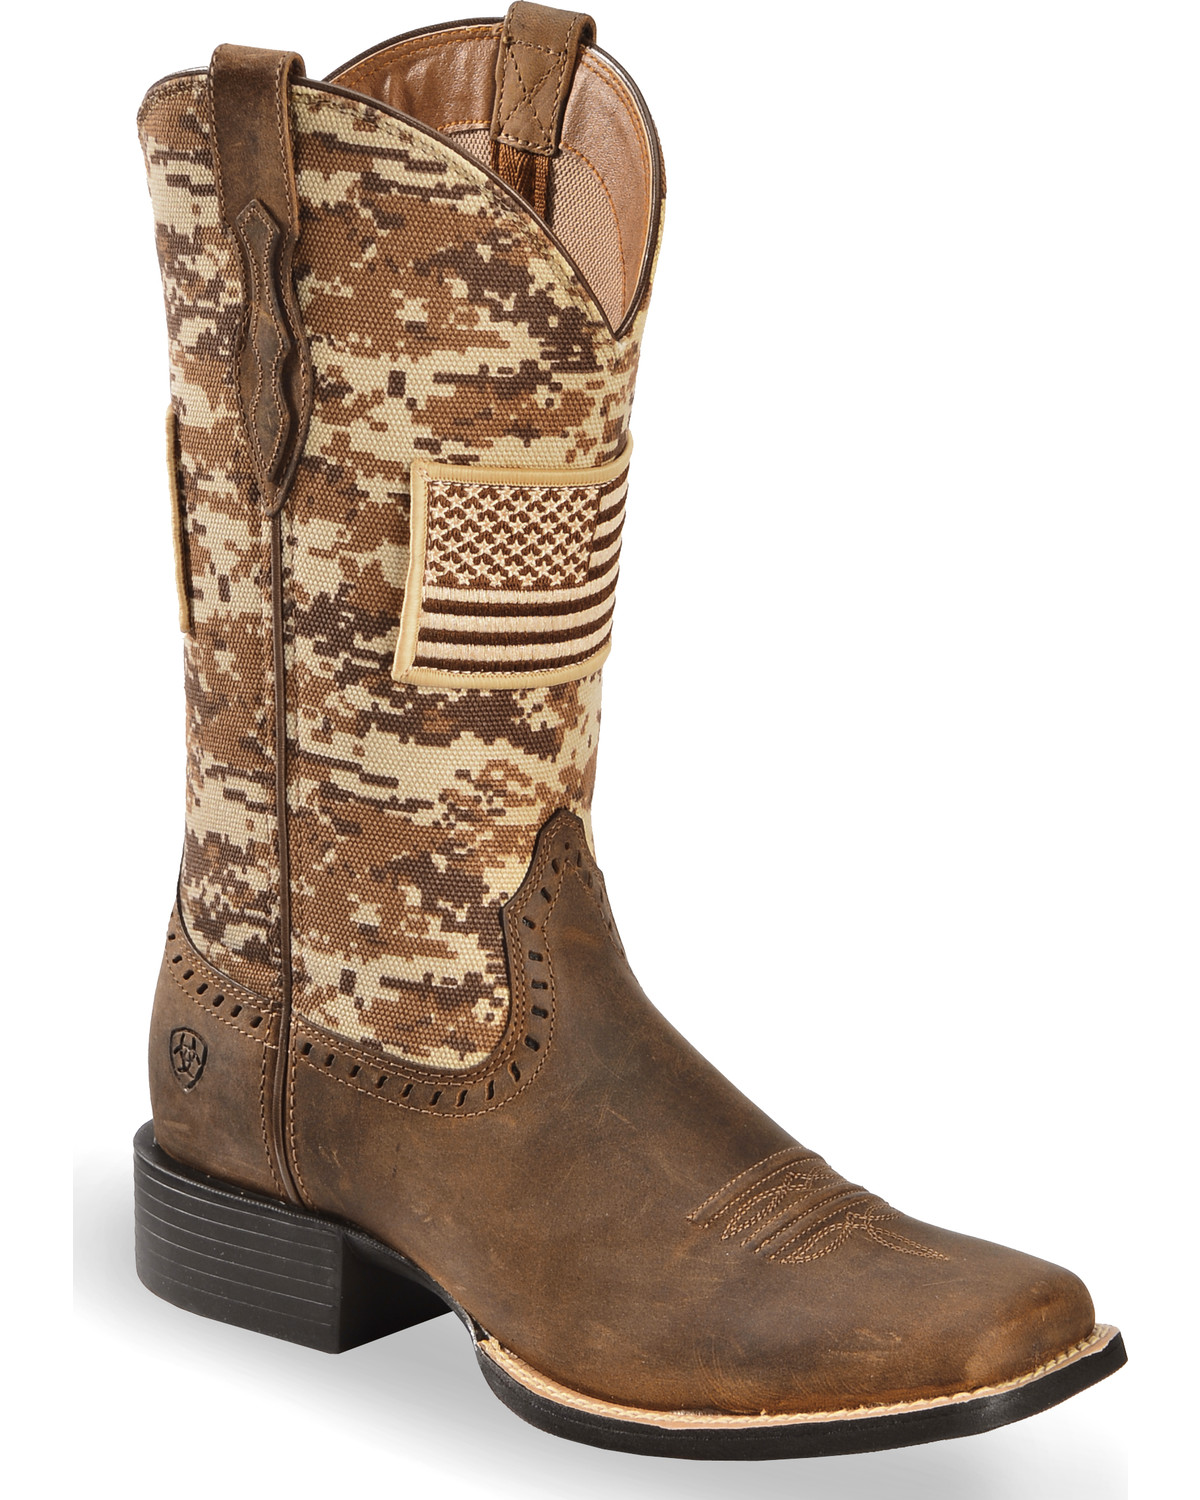 Ariat Women's Round Up Patriot Western Performance Boots - Broad Square Toe